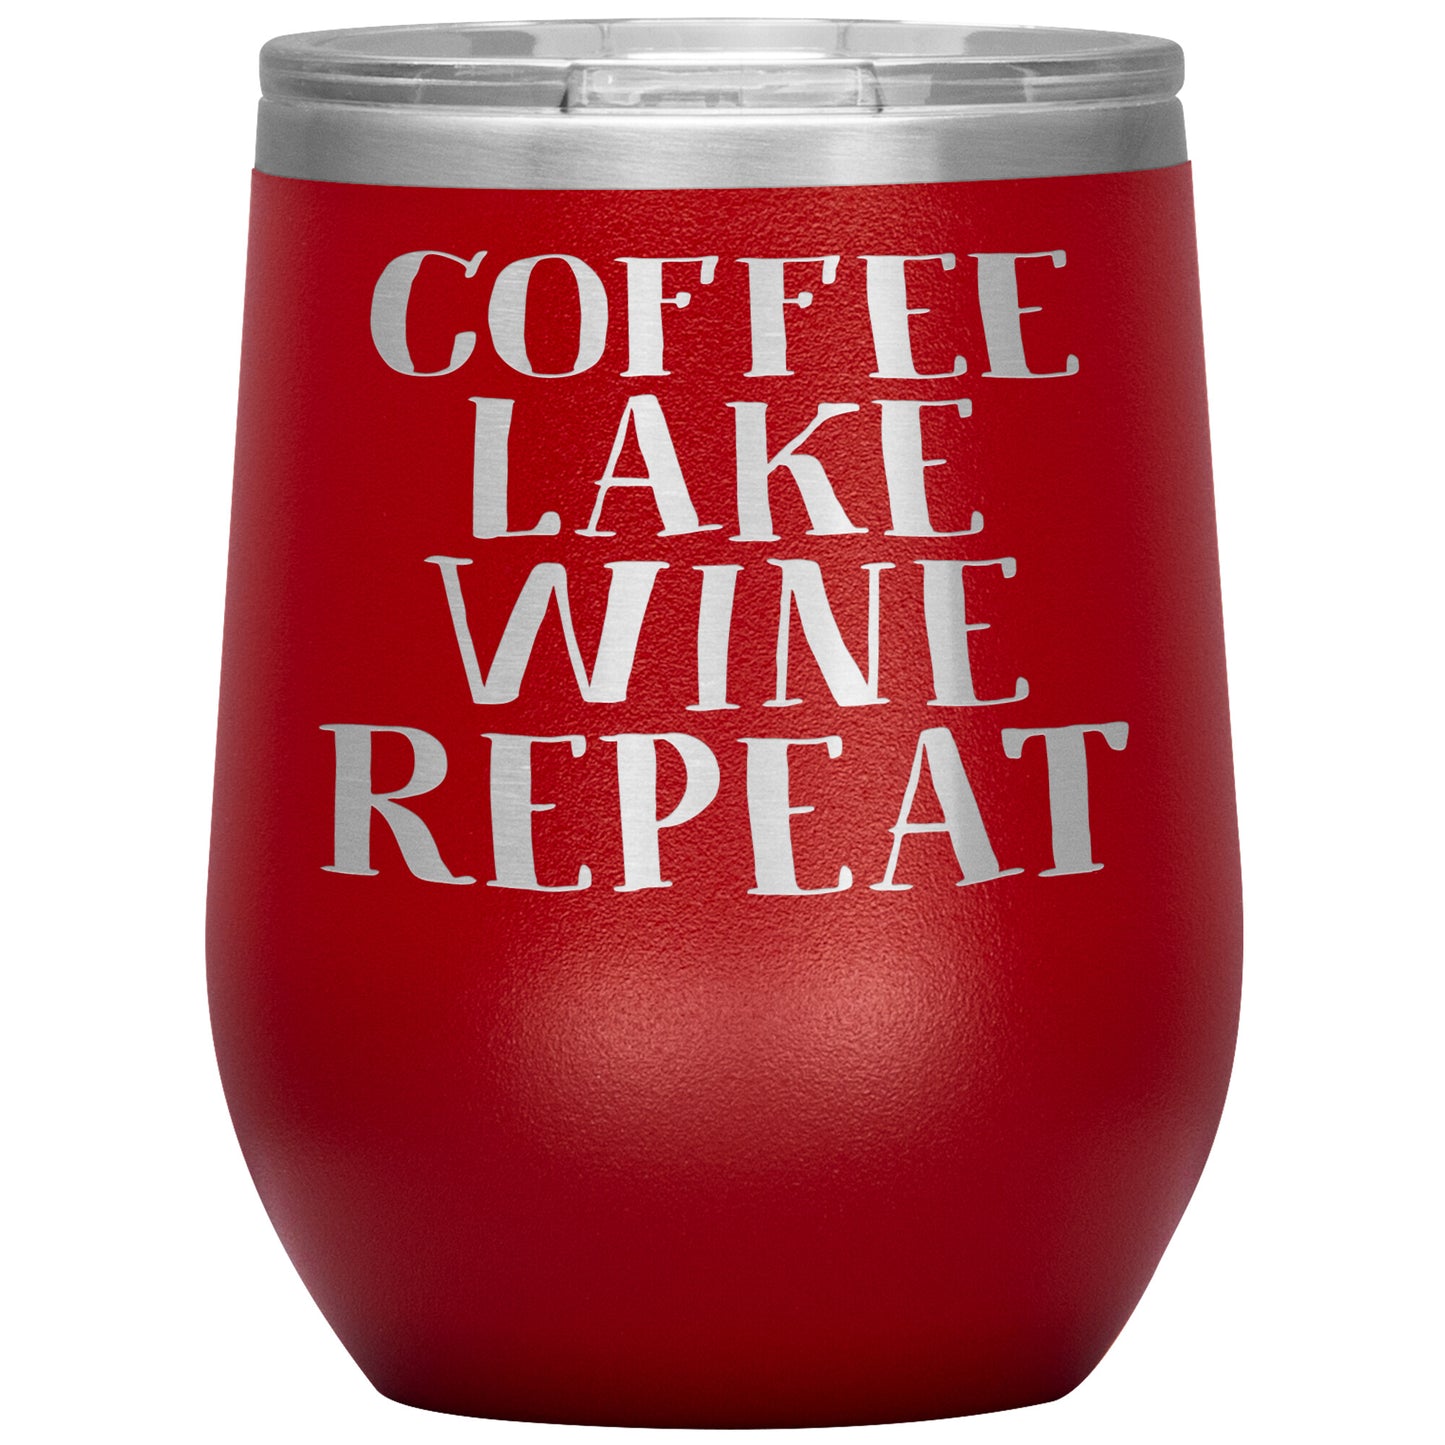 Coffee Lake Wine Repeat Funny 12oz Wine Tumbler - Stemless Cup